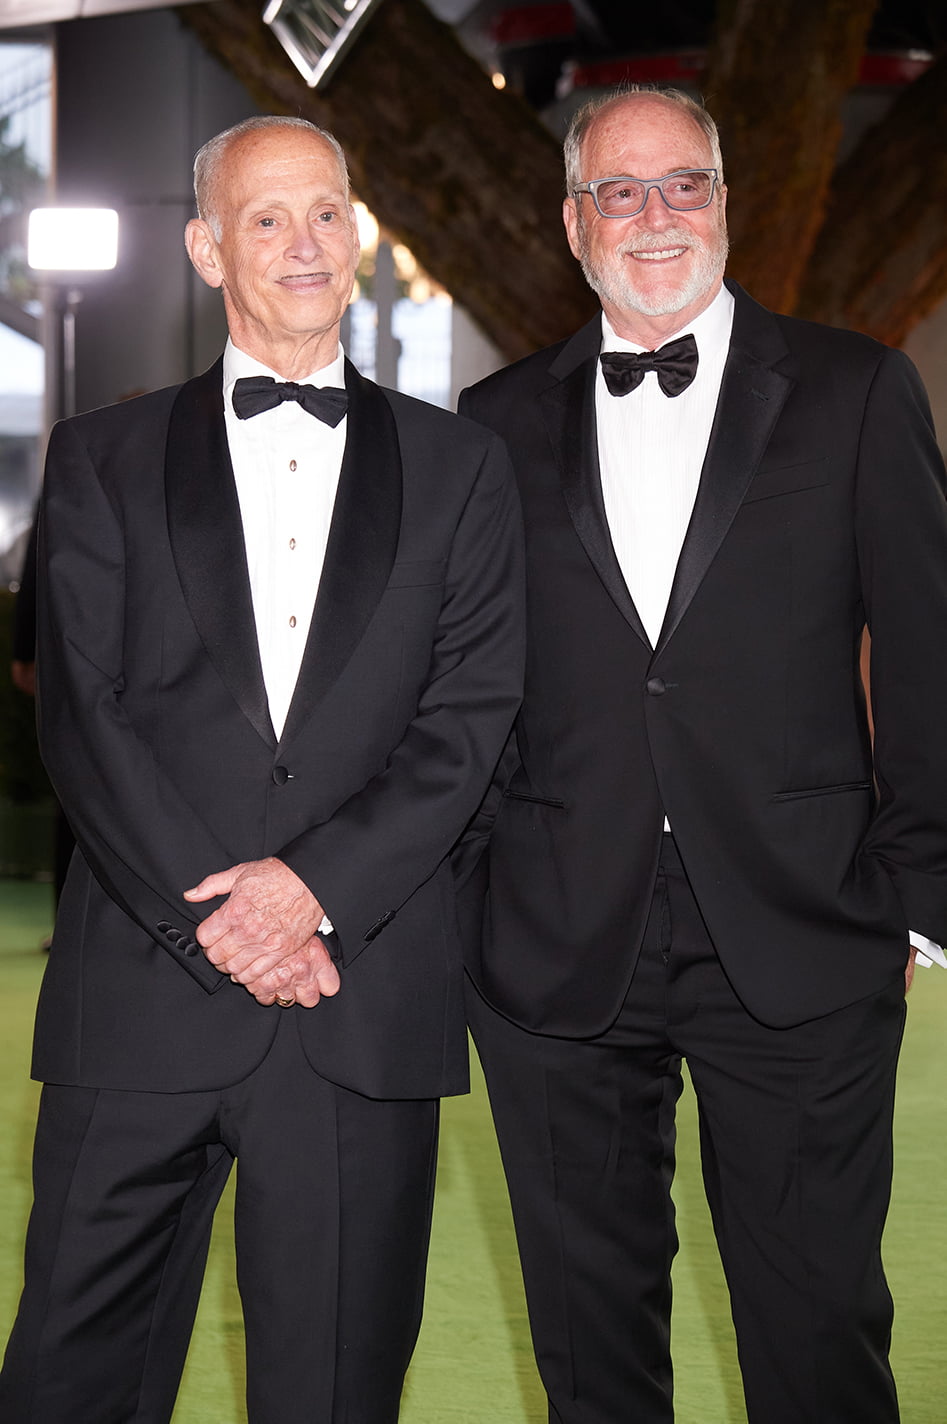 Jon Waters, Greg Gorman attend the Academy Museum of Motion Pictures Opening Gala, September 25, 2021